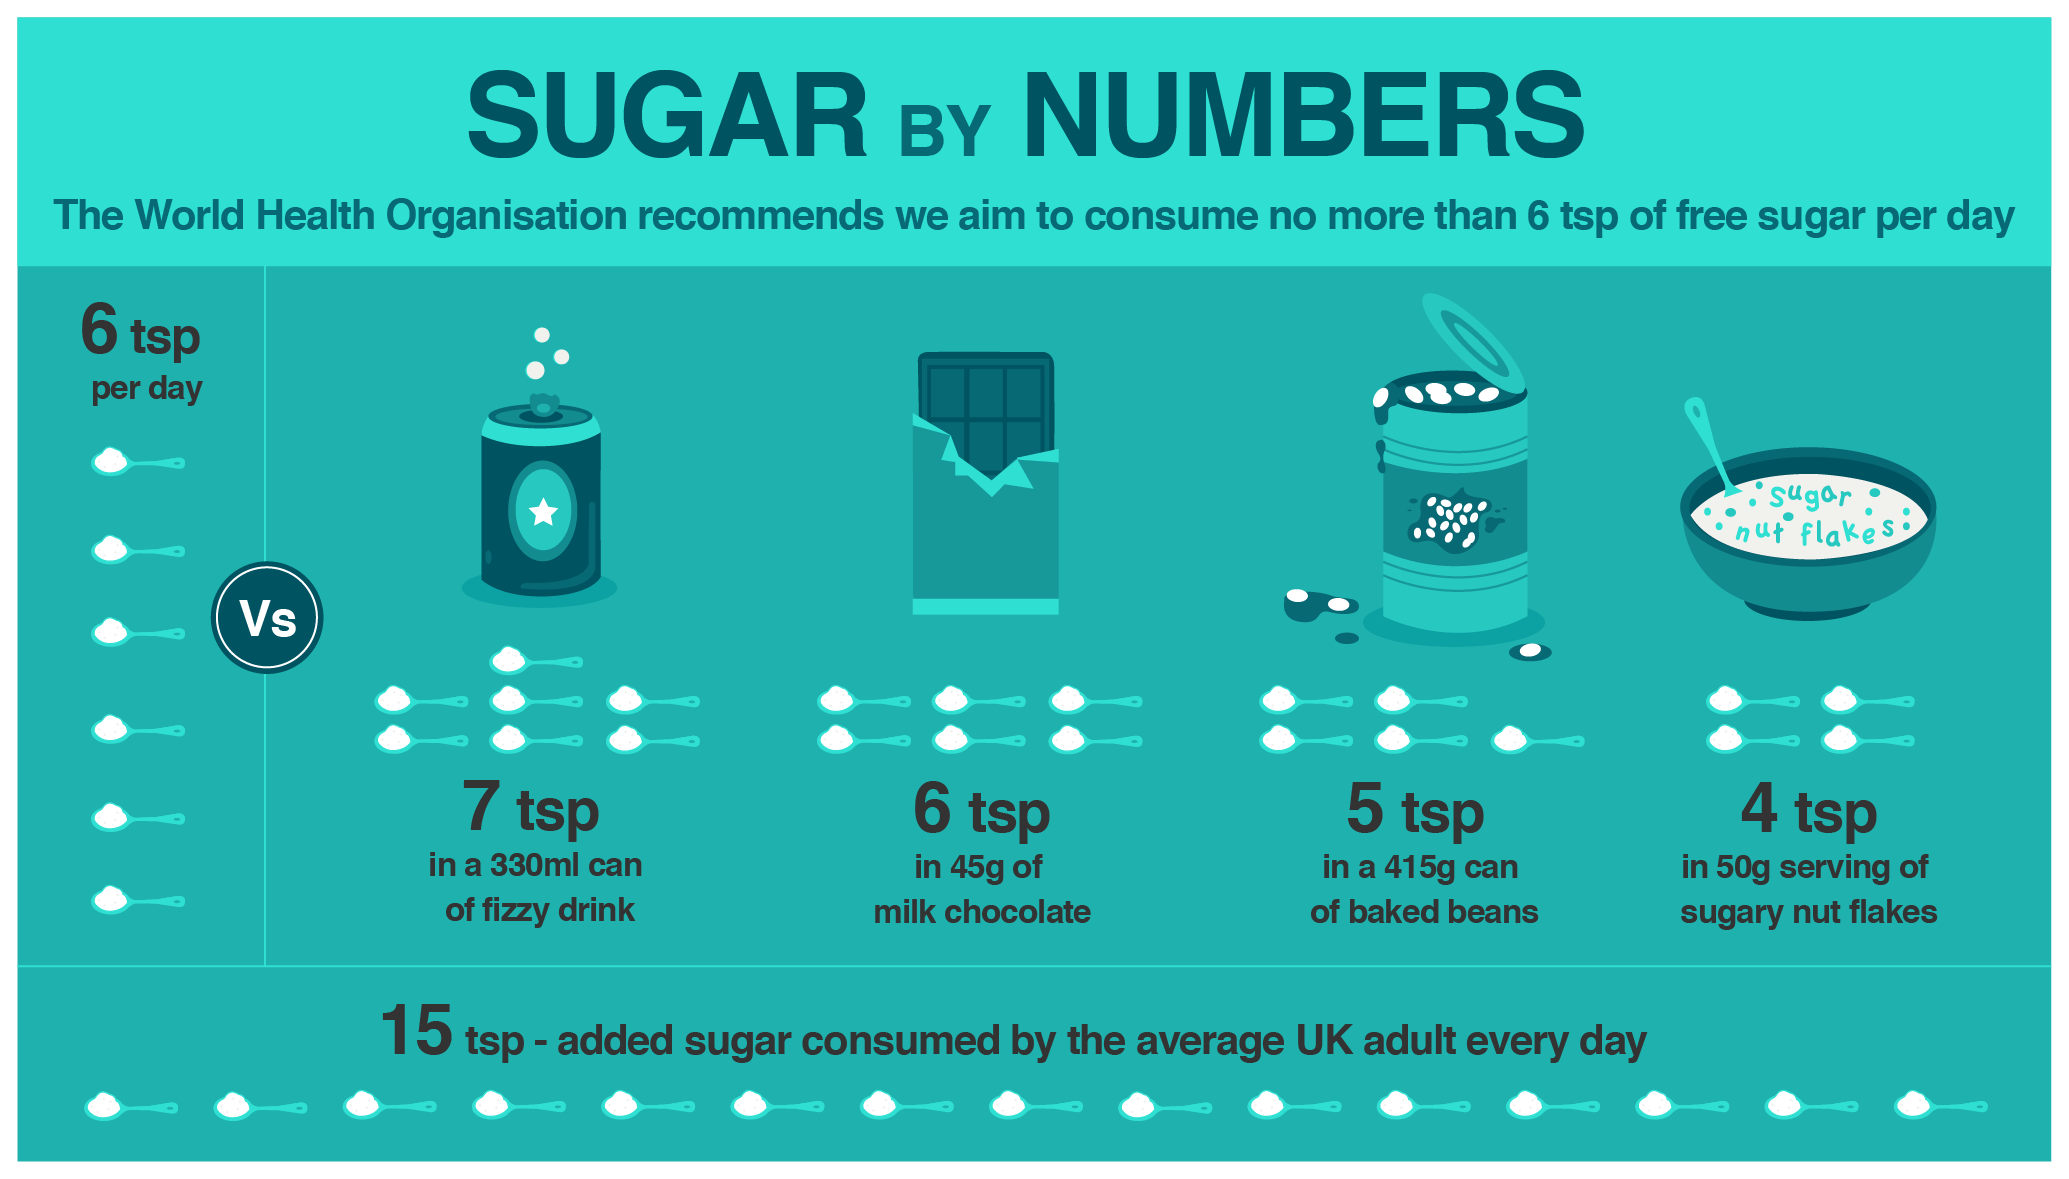 Sugar service code. Sugar how many или how much. Much Sugar или many Sugar. Healthy Fizzy Drink. How much Sugar in a Day.